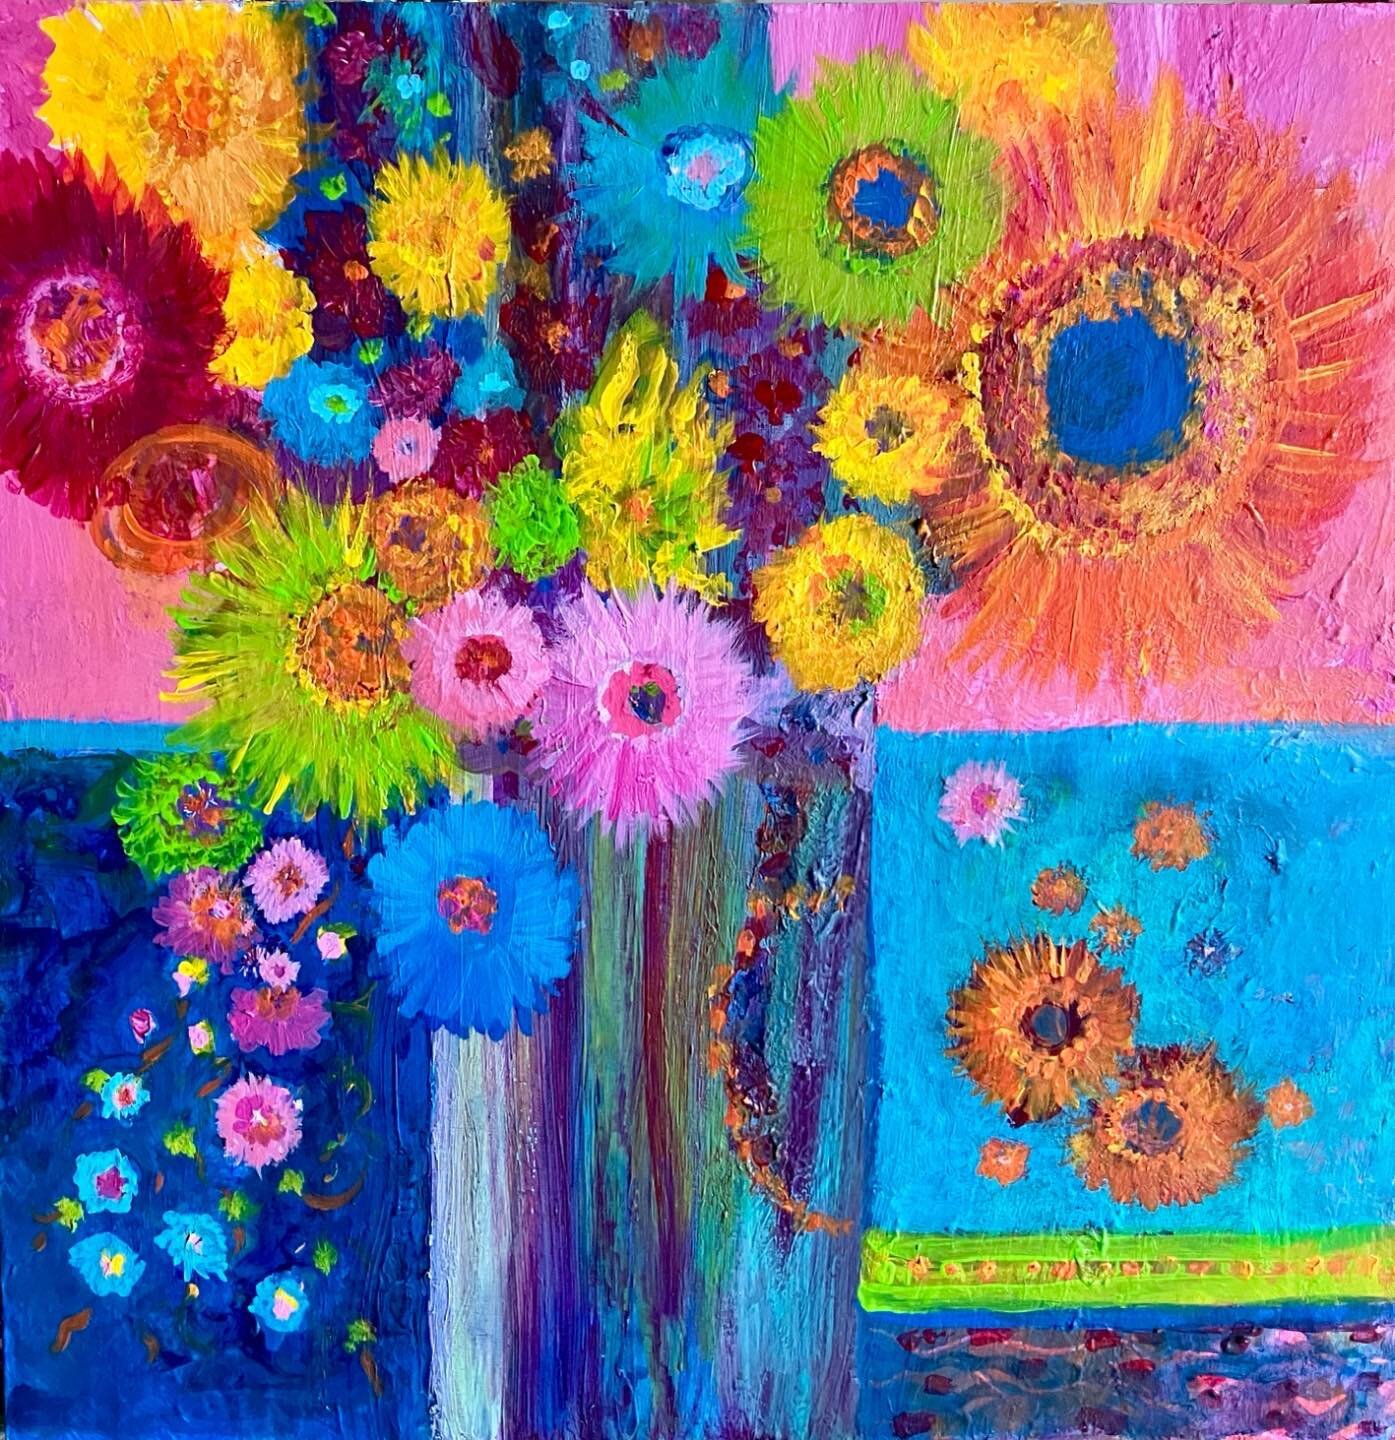 &ldquo;The force&rdquo; - 12 x12 inch wood panel abstract acrylic flowers. #colourfullife#abstractacrylics#colourfulflowers#happyplace